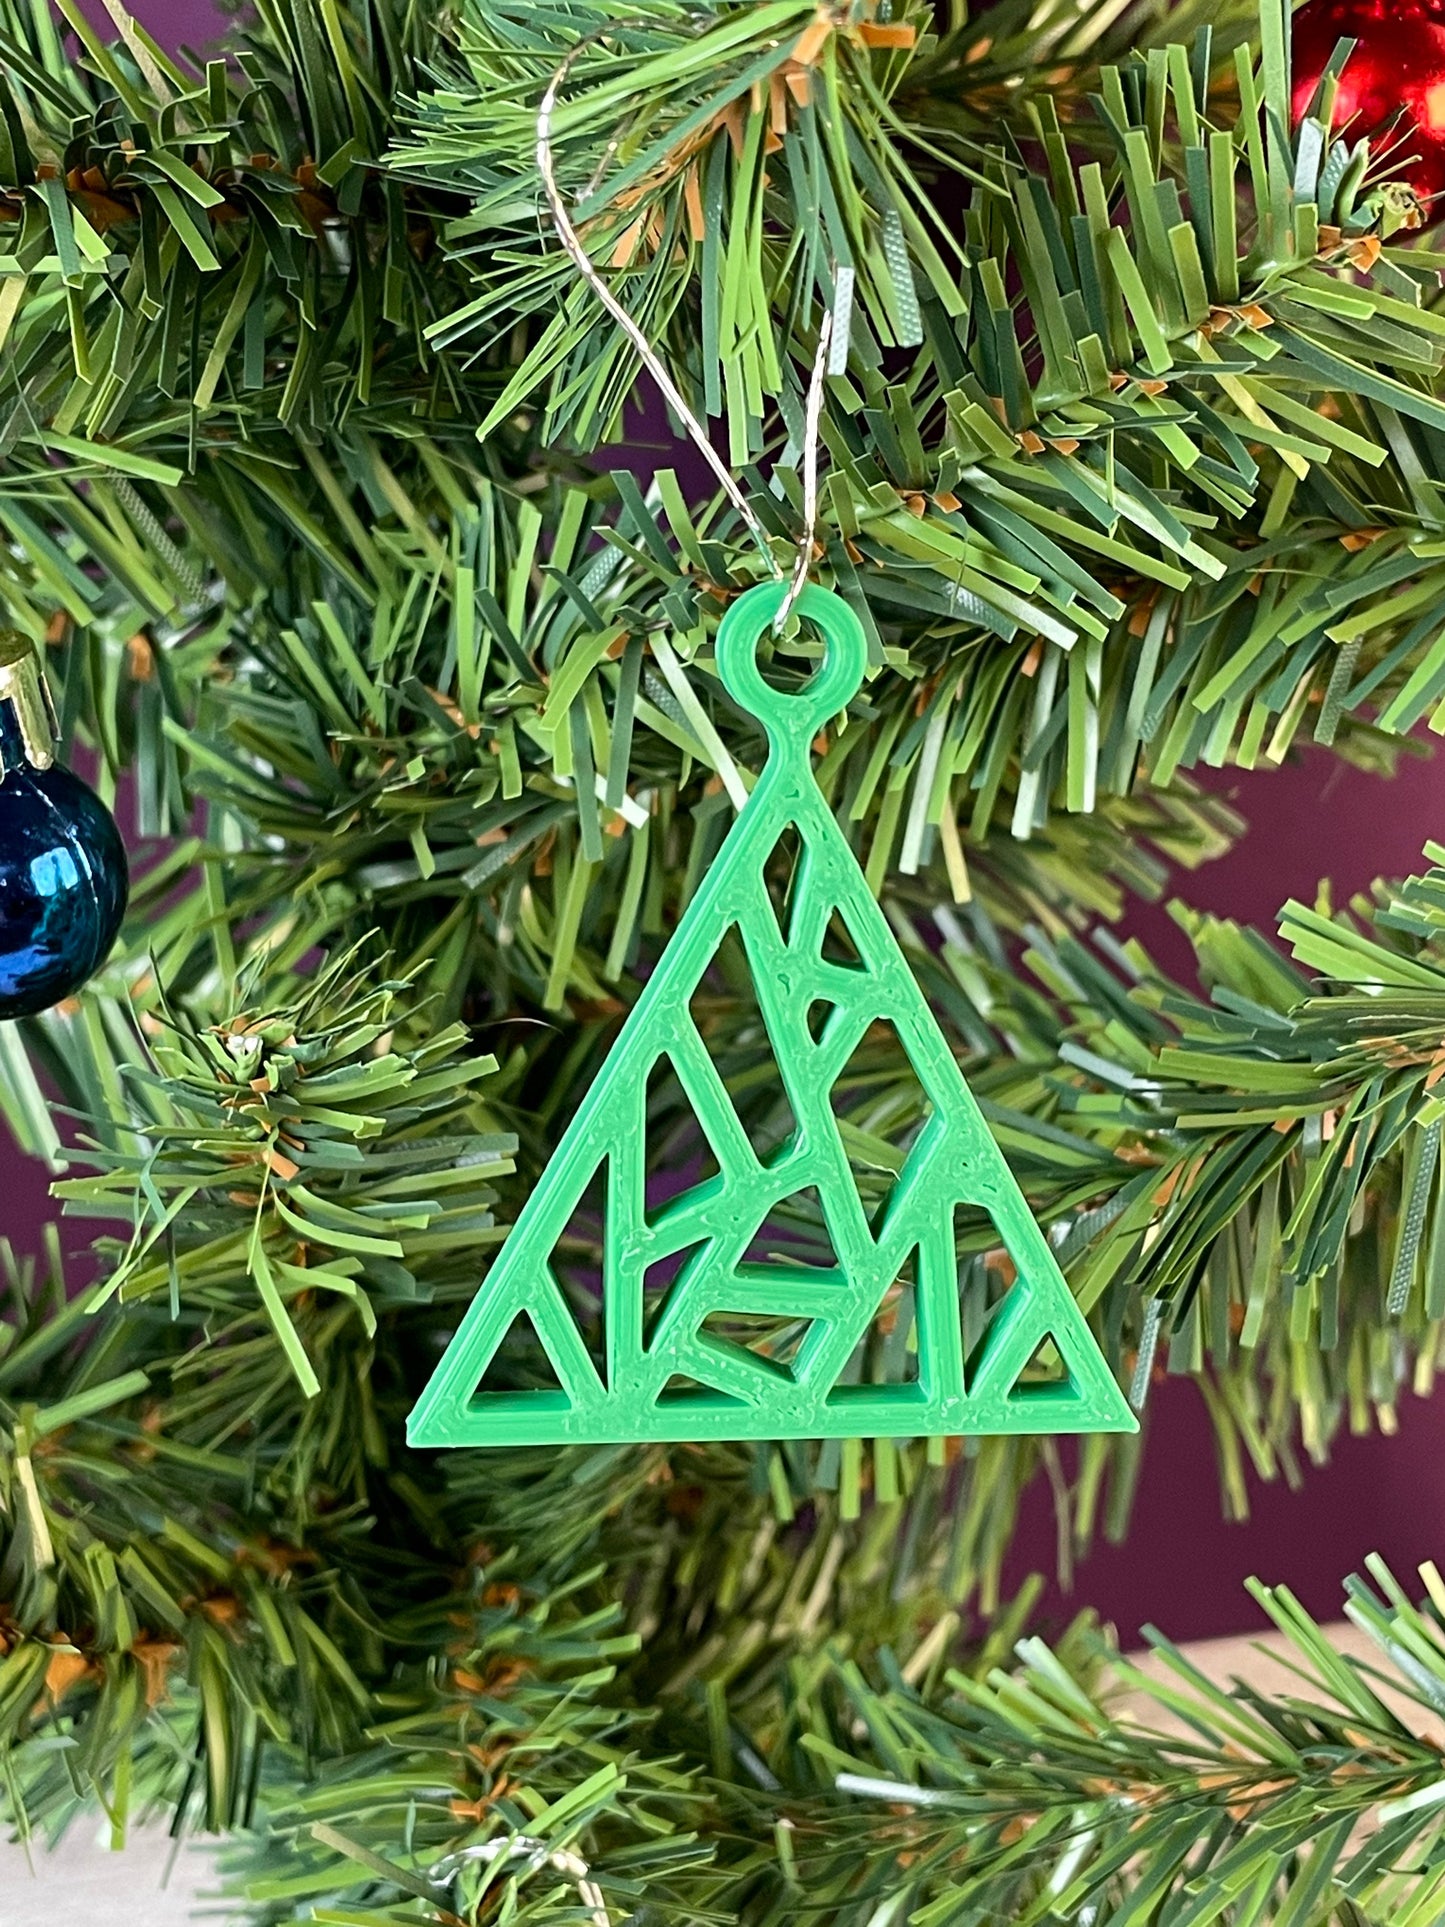 A close up of a fractal tree ornament printed in green filament hung on a christmas tree with a purple background.